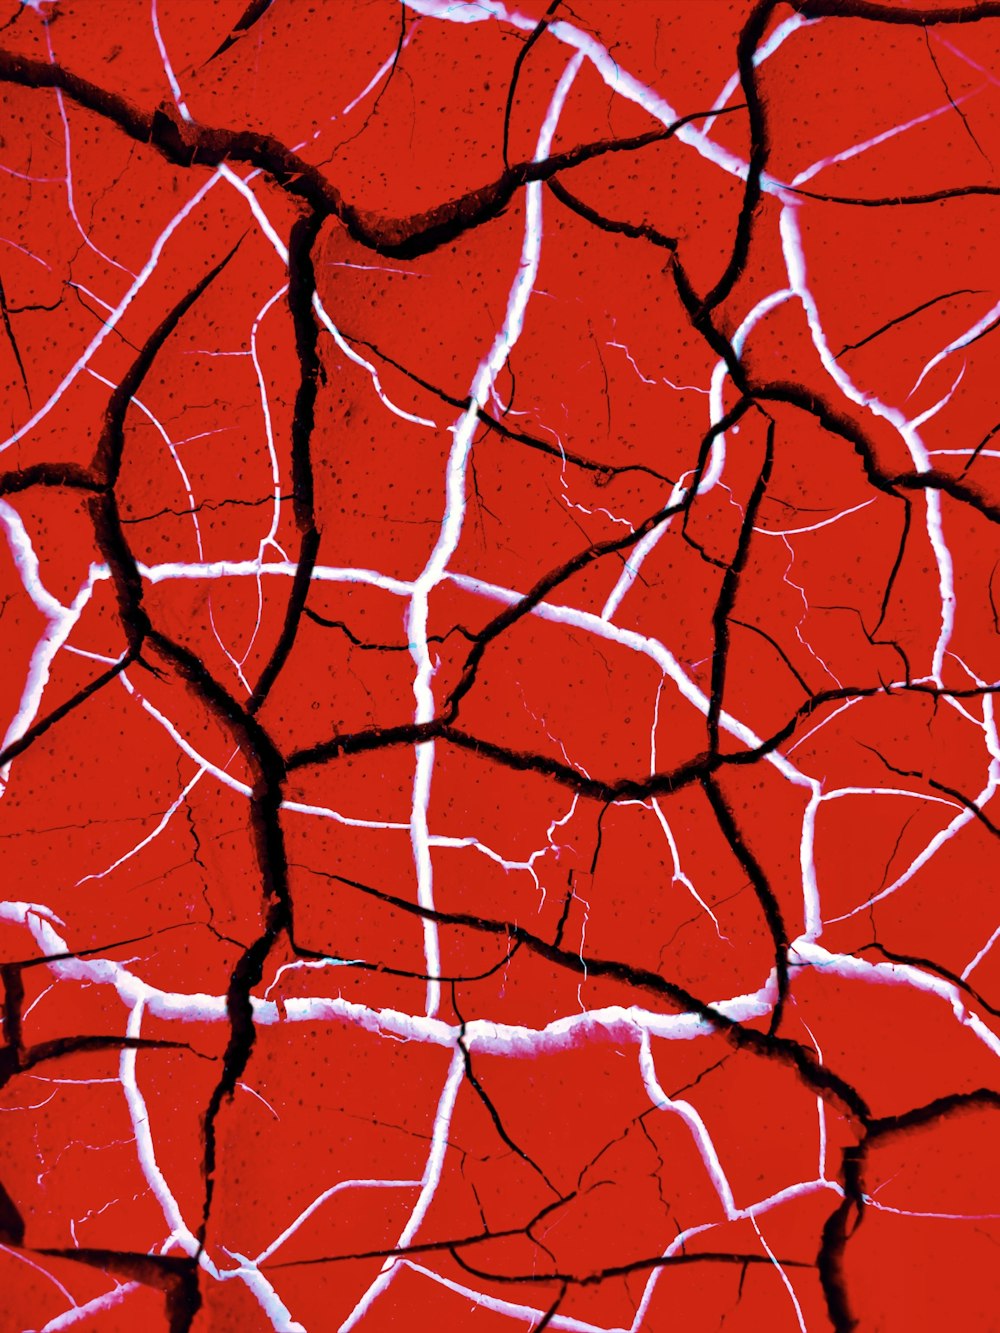 a close up of a red surface with cracks